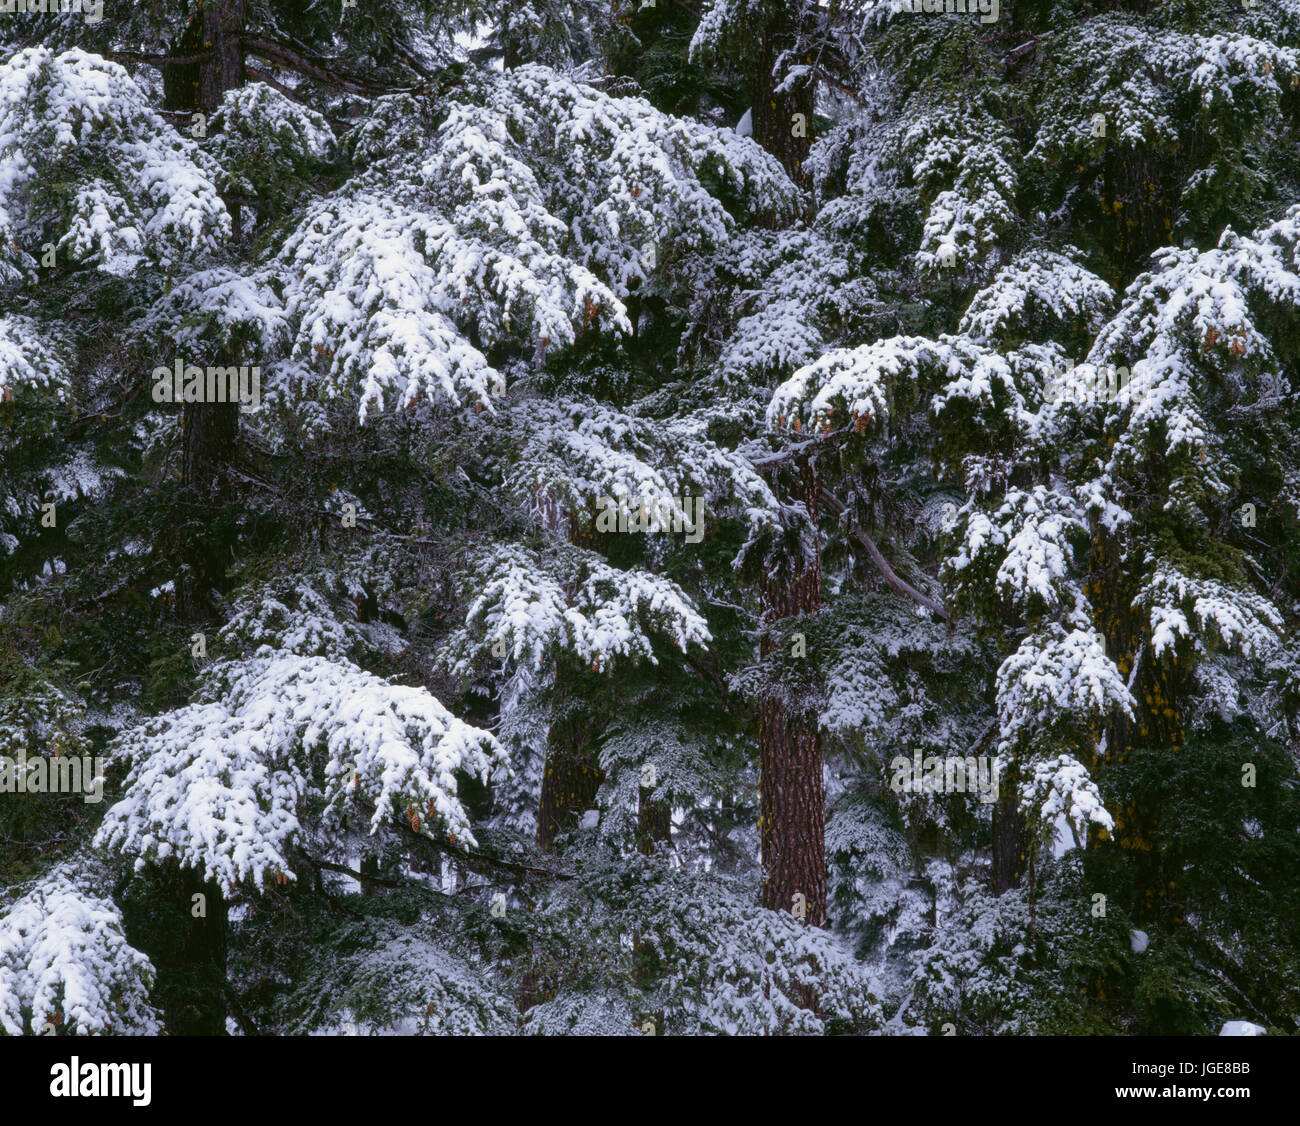 USA, Oregon, Crater Lake National Park, Winter snow clings to mountain hemlock trees. Stock Photo